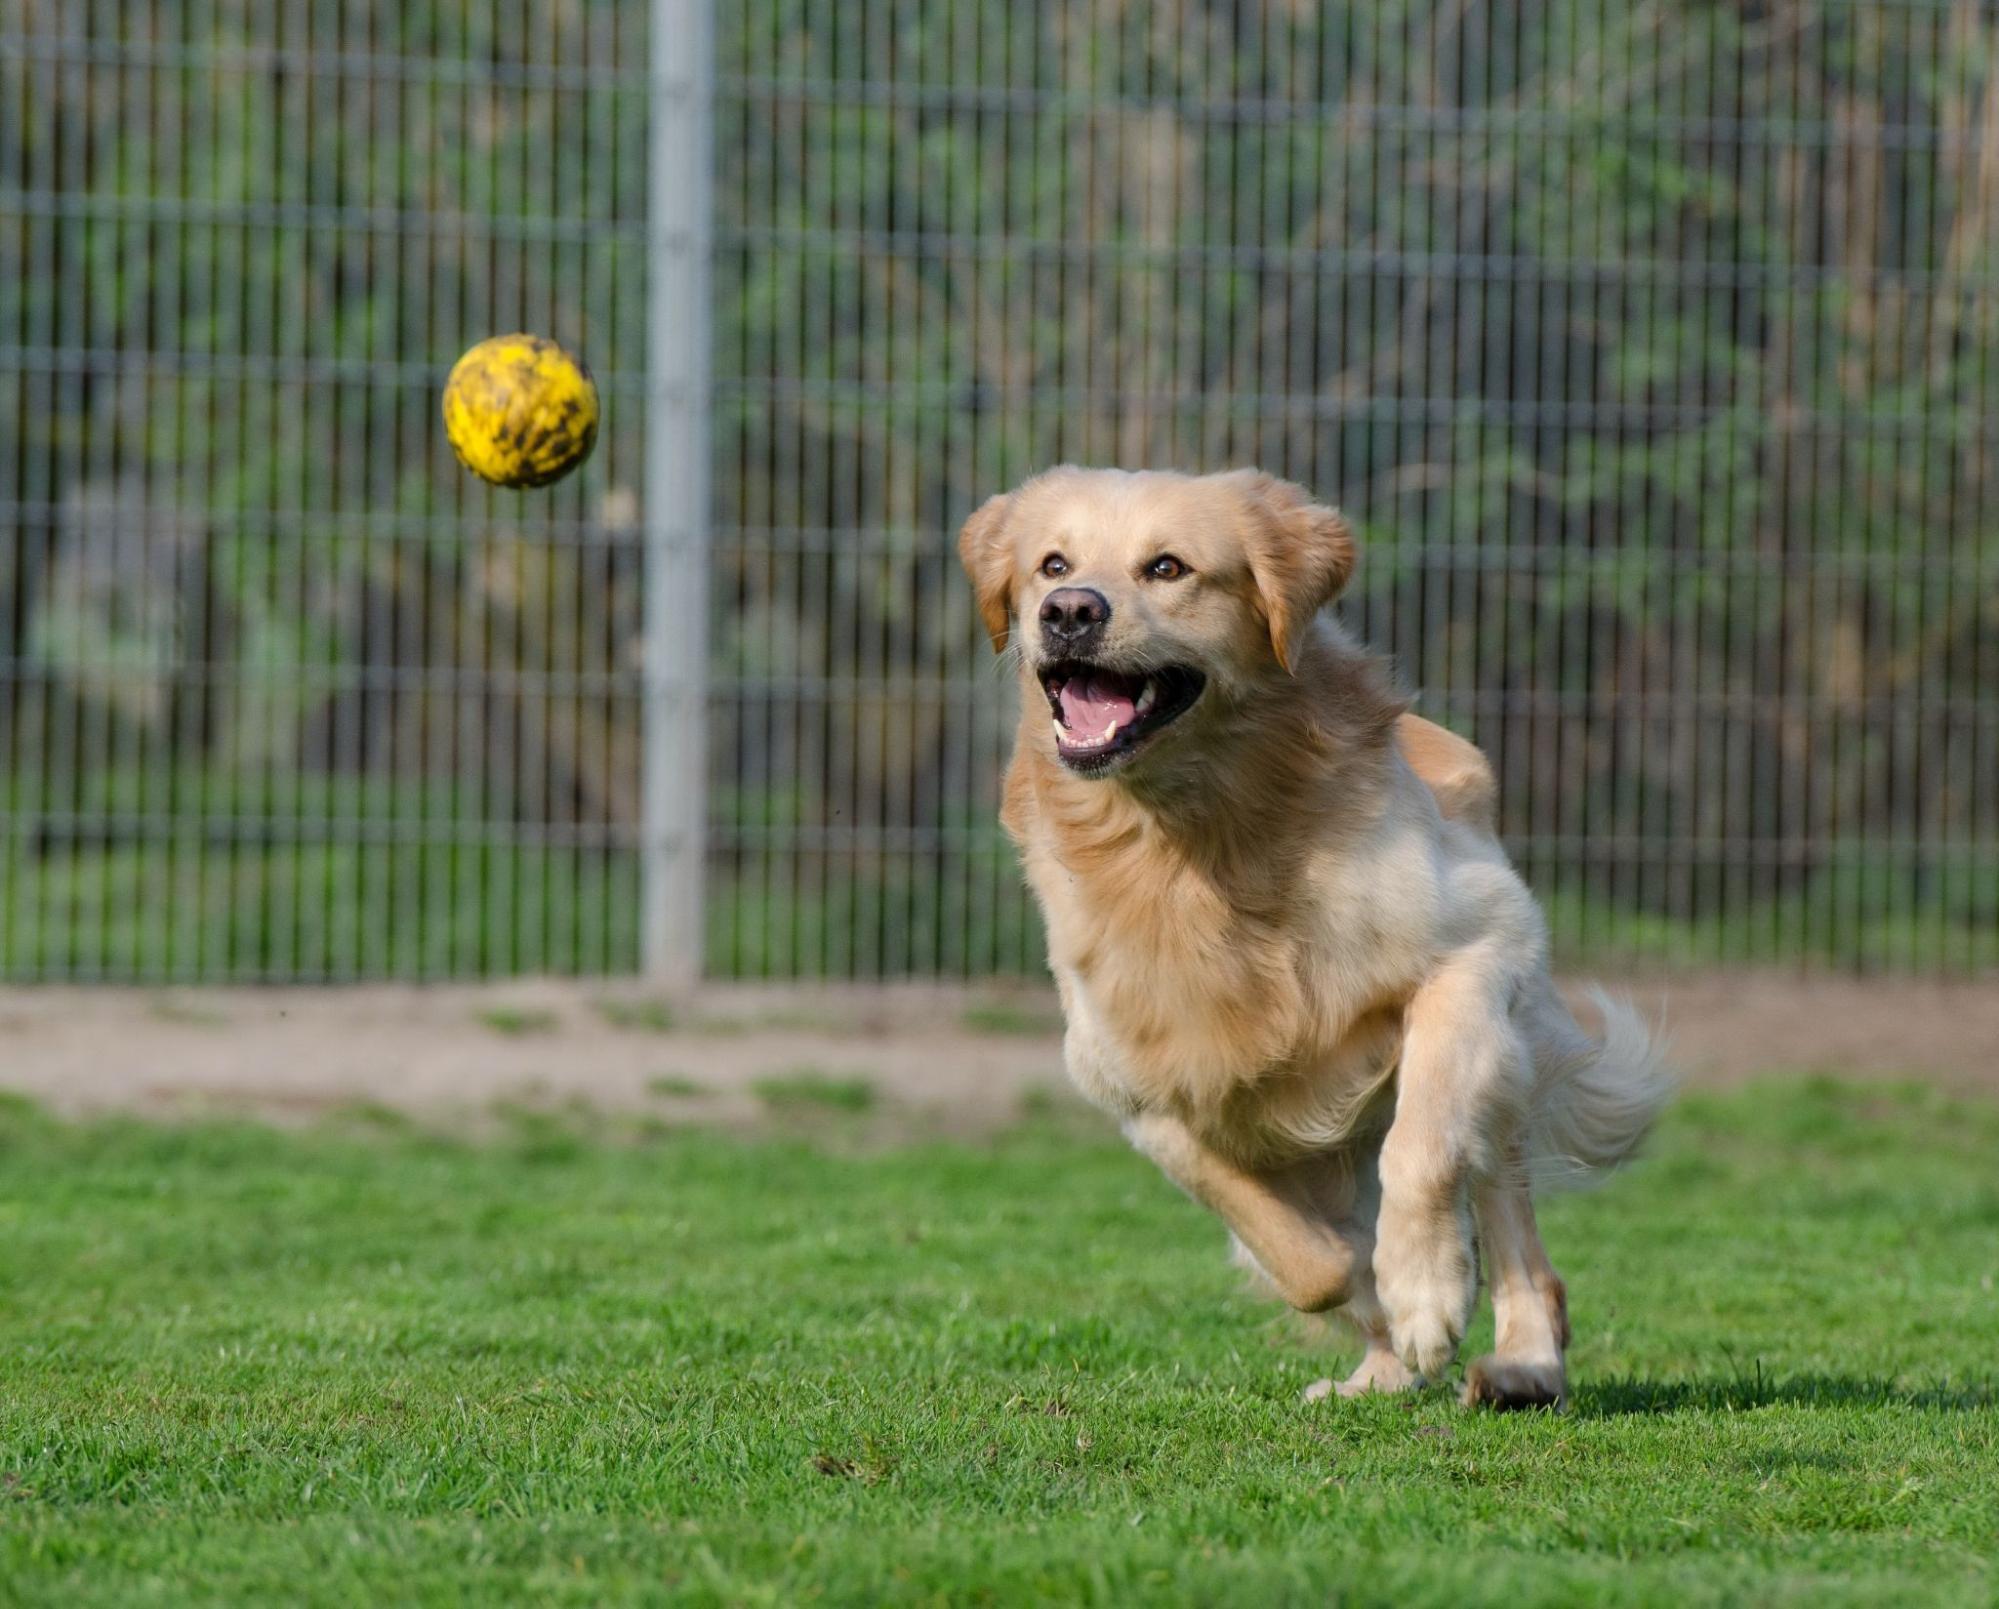 The Complete Guide for Setting Up a Dog Agility Course at Home